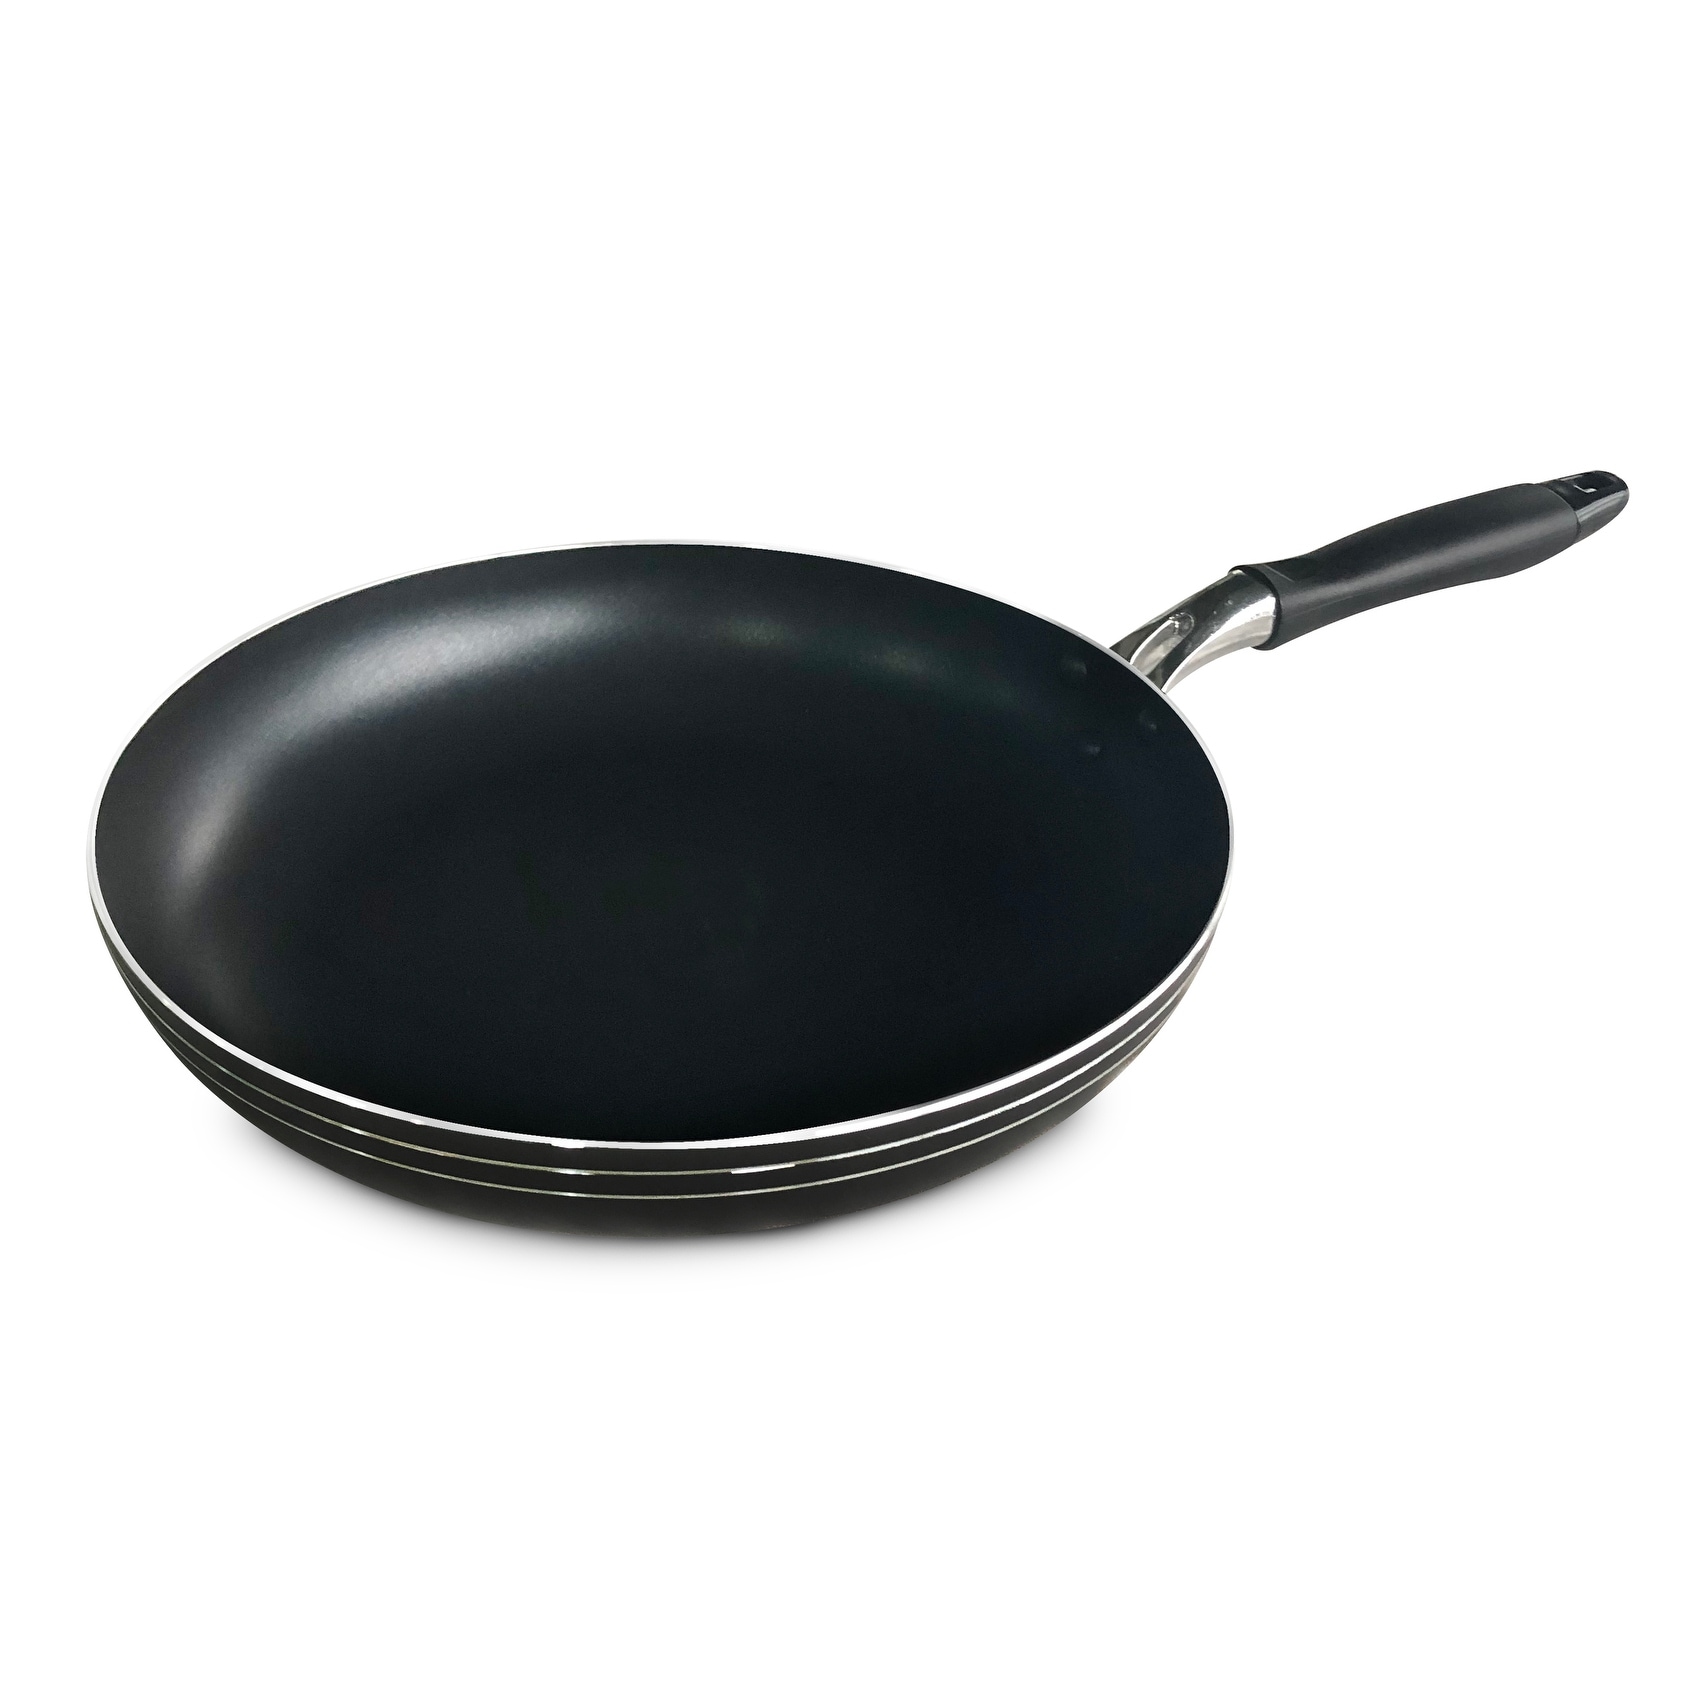 https://ak1.ostkcdn.com/images/products/is/images/direct/2d57d5a7fa47eda1b802bf5dbcac23b2a01ae8c5/Bene-Casa-aluminum-nonstick-8%22-Fry-Pan%2C-no-stick-coating%2C-and-heat-resistant-handle%2C-dishwasher-safe-fry-pan.jpg